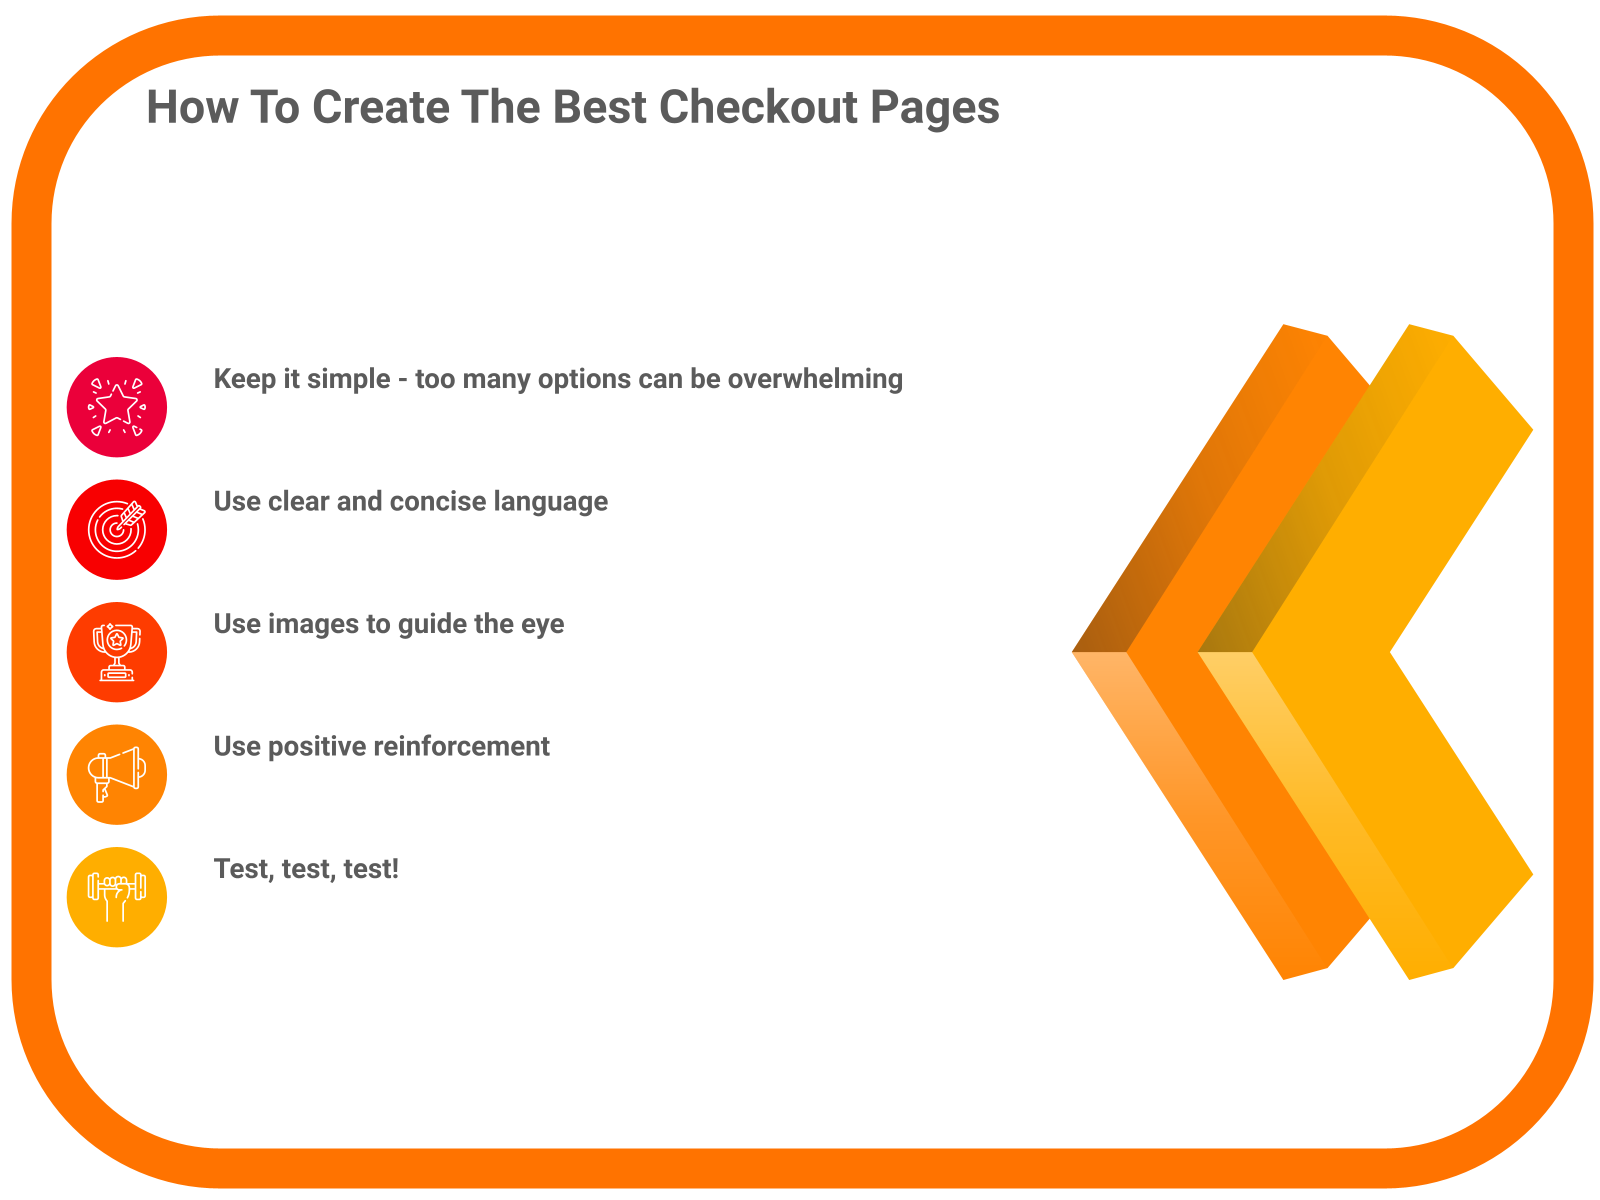 How To Create The Best Checkout Pages